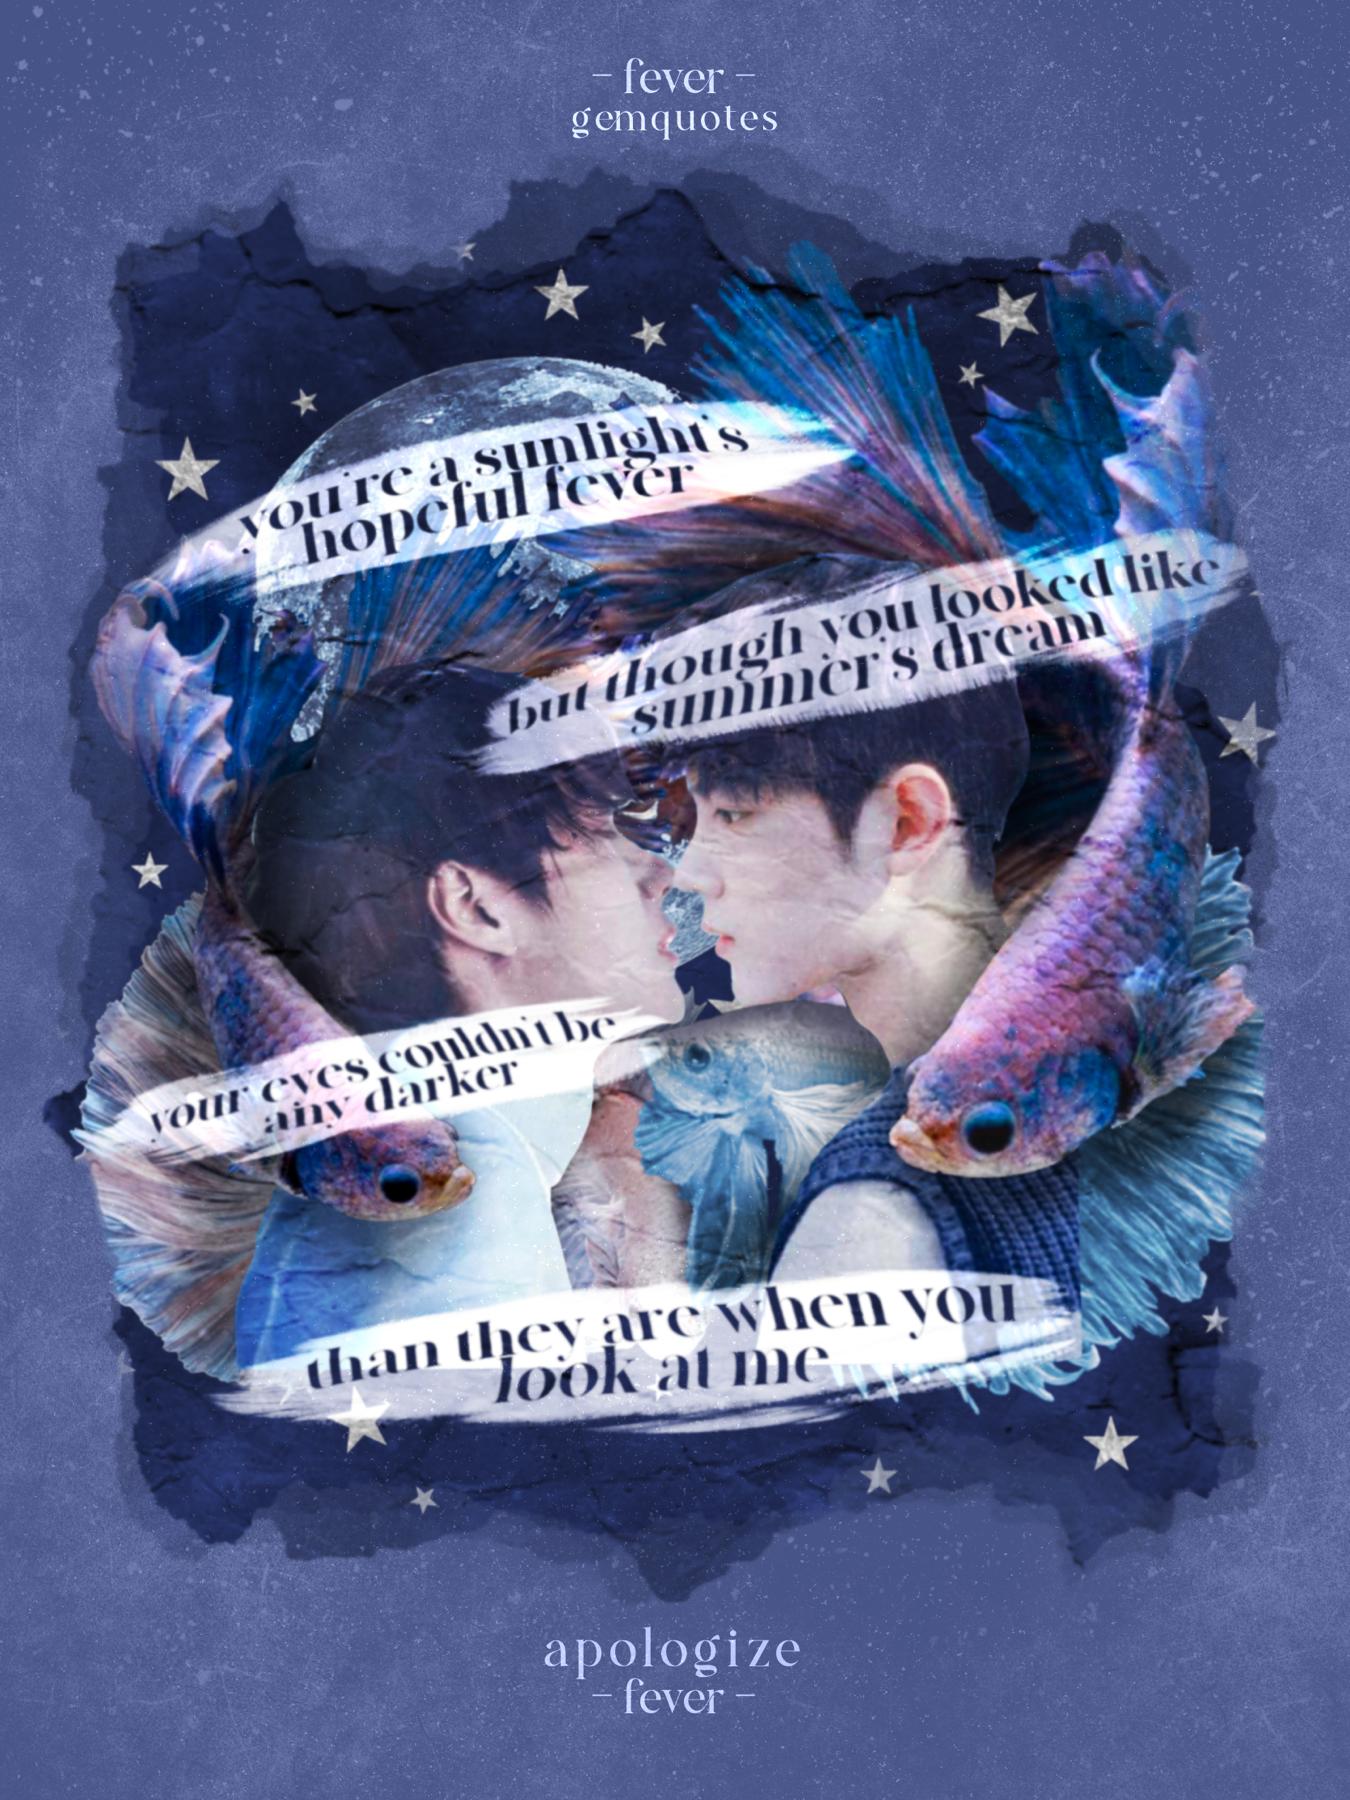 “🌙tap⭐️”
Poem by me :) As someone who seldom sees LGBT asians in media, it’s rly nice to see some evry once in a while. Betta fish make a return, sending love~~💙#stopasianhate
